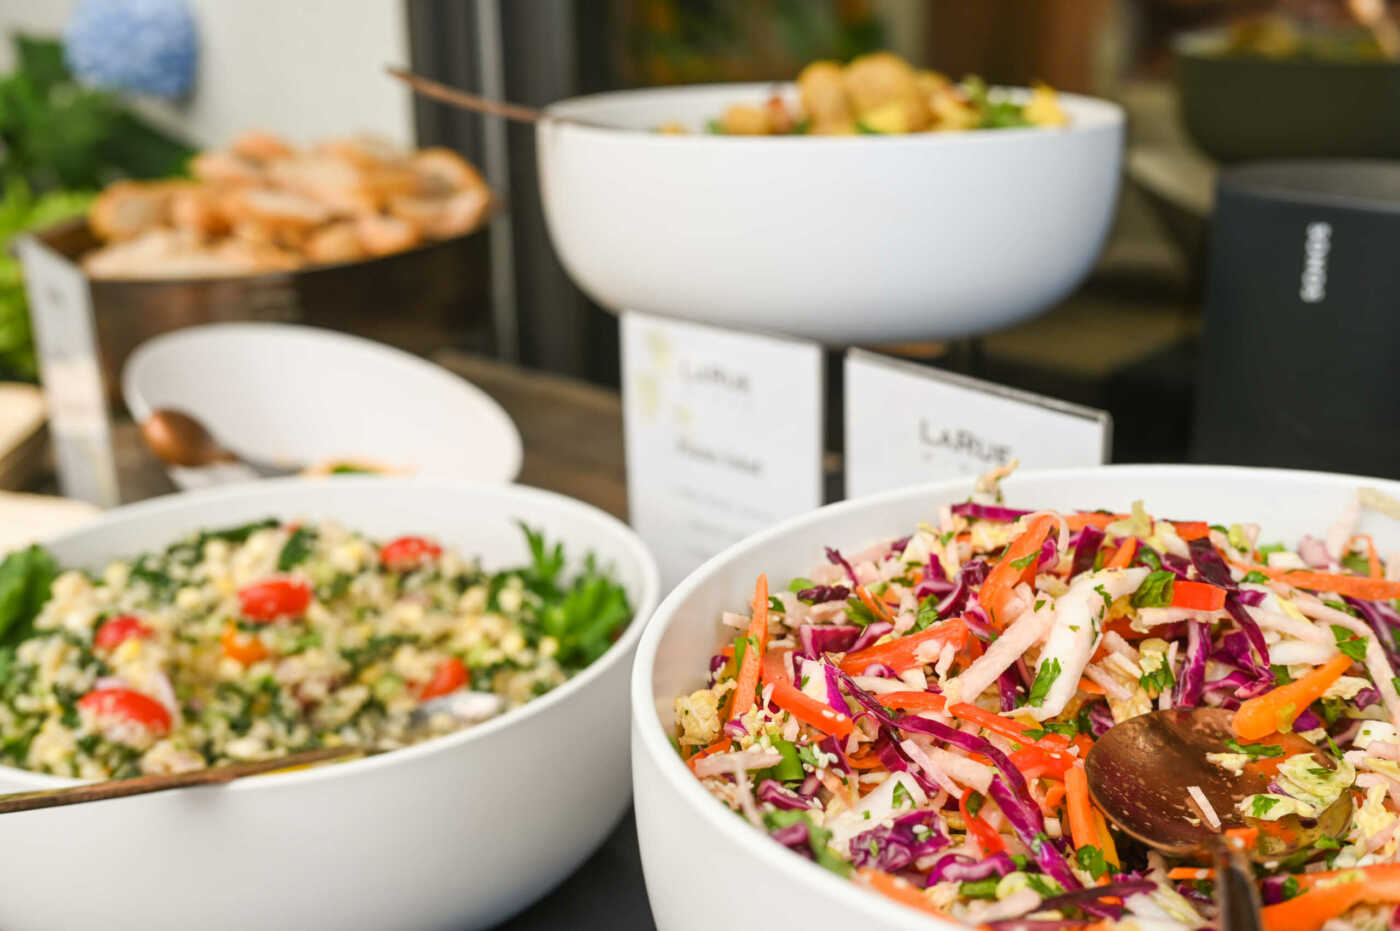 A variety of bowls of salads on a table.